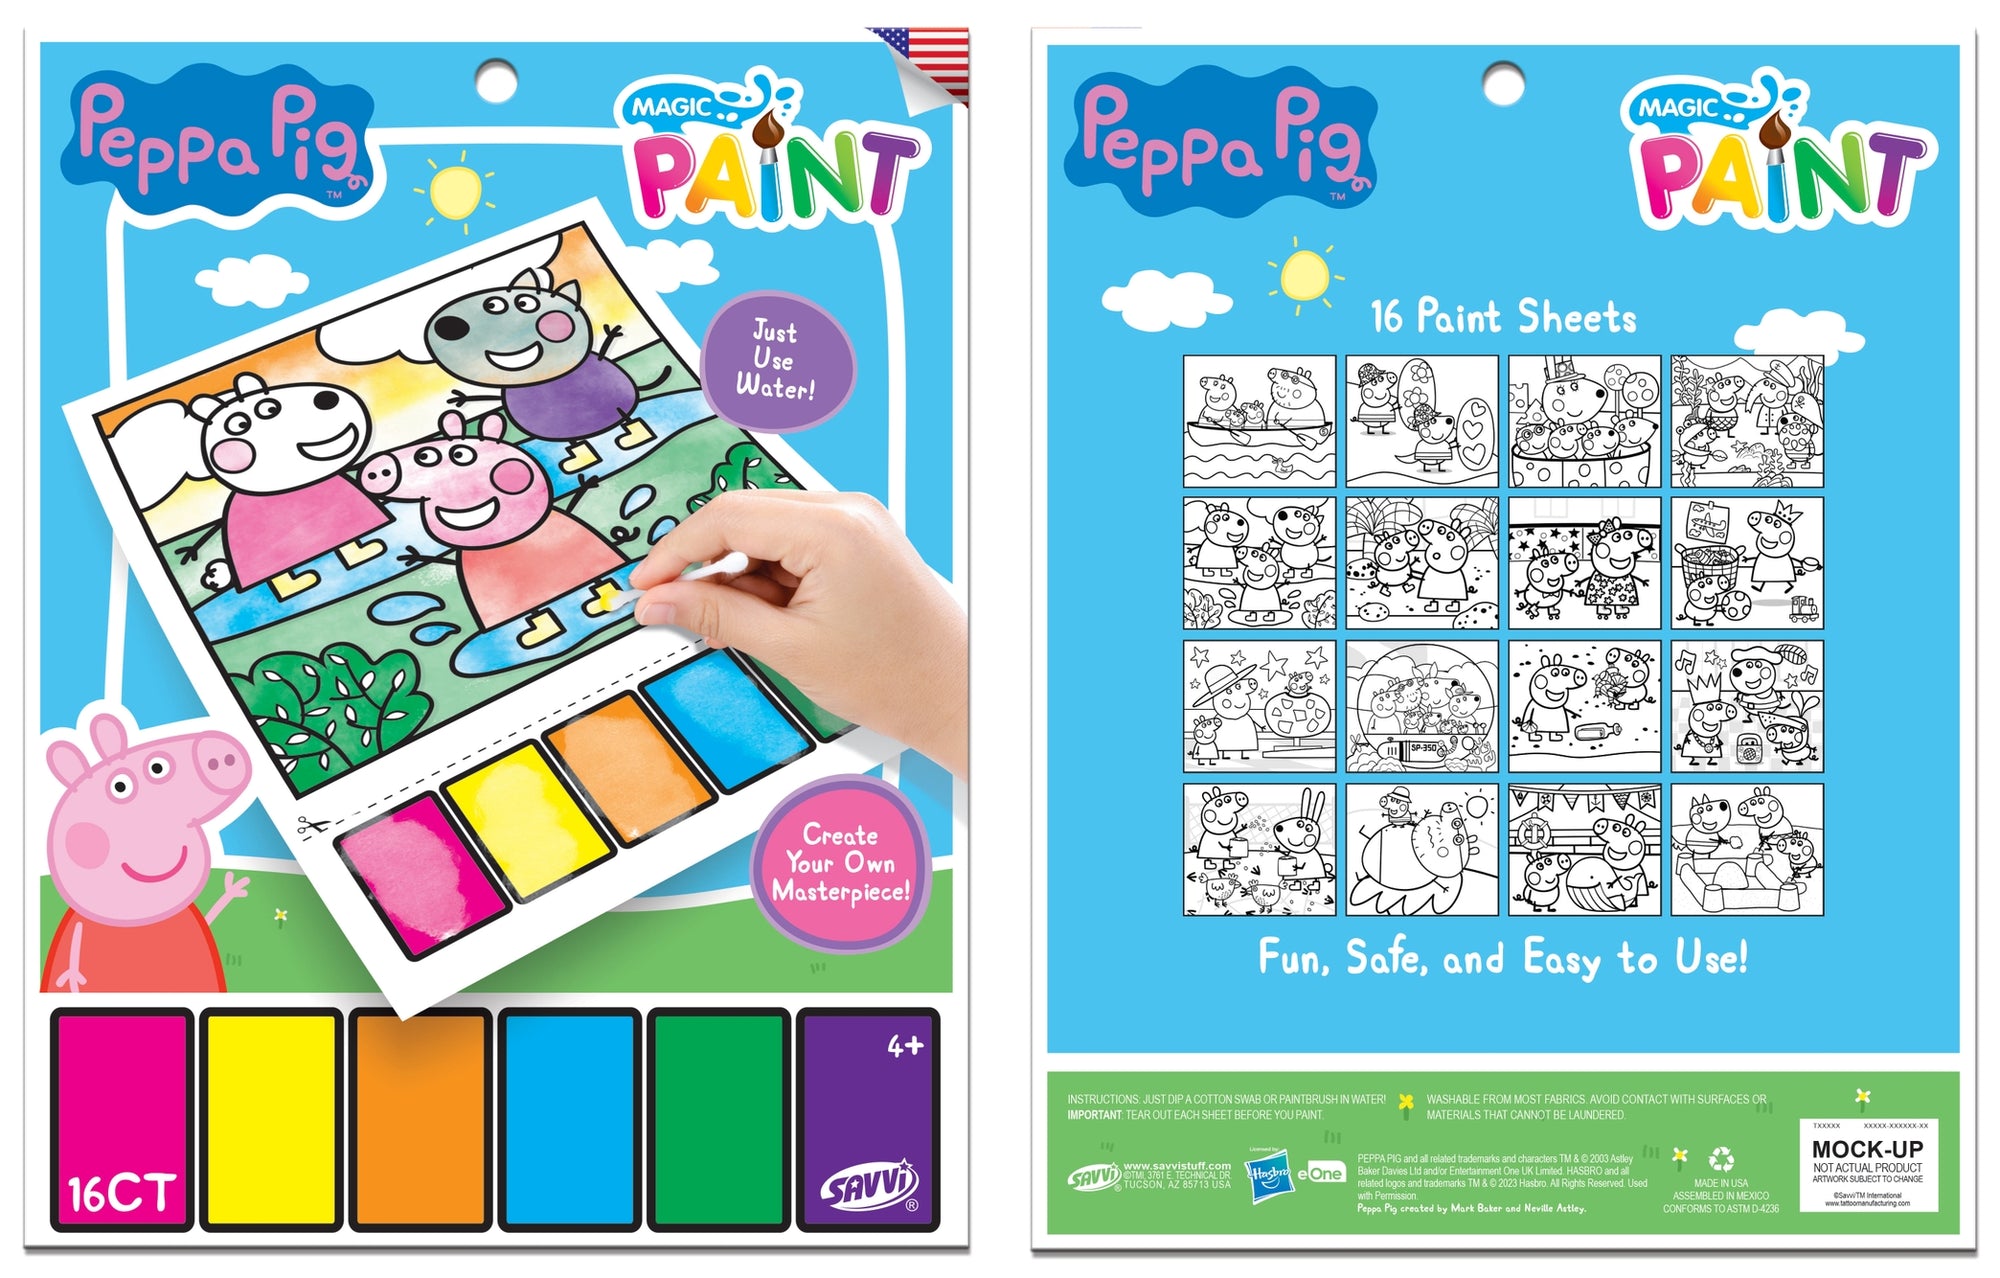 Peppa Pig Large Magic Painting Posters